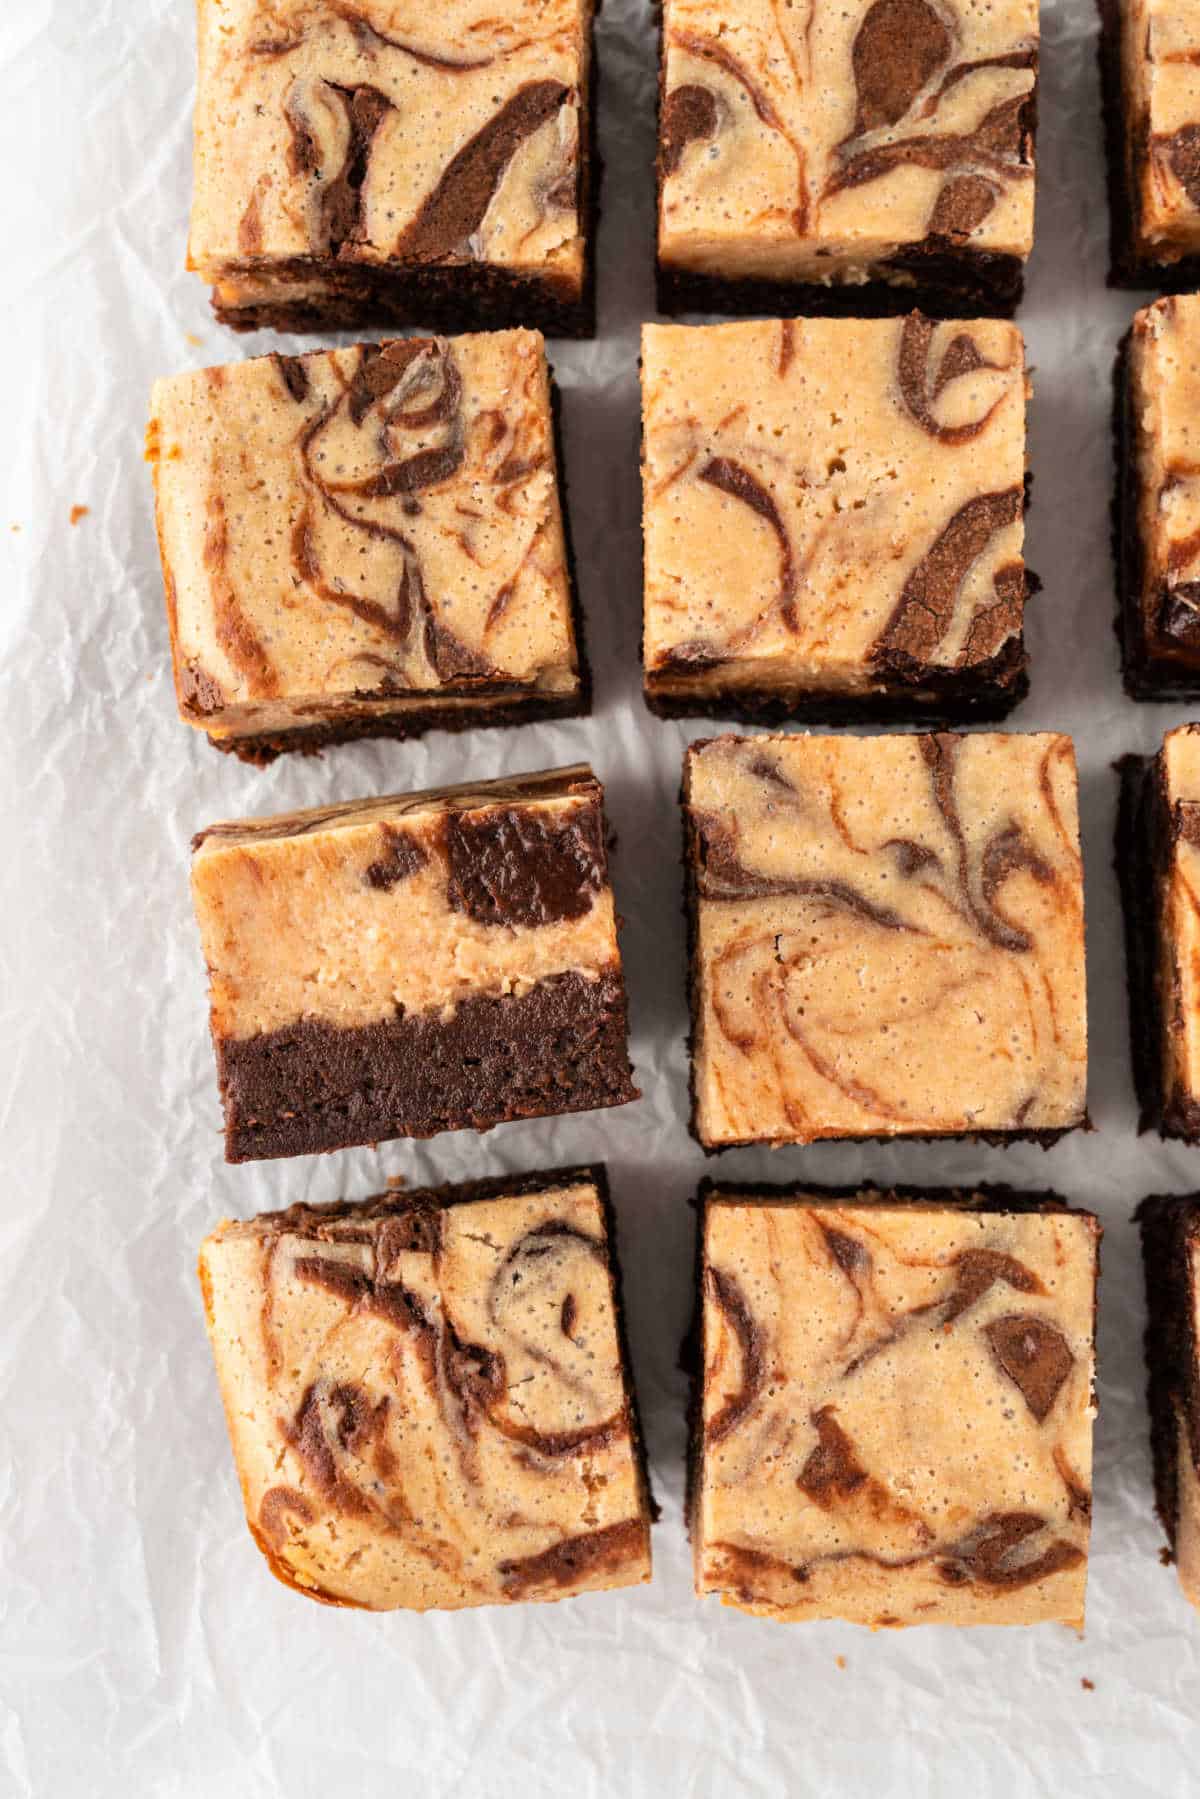 Peanut butter cheesecake brownies cut into squares.